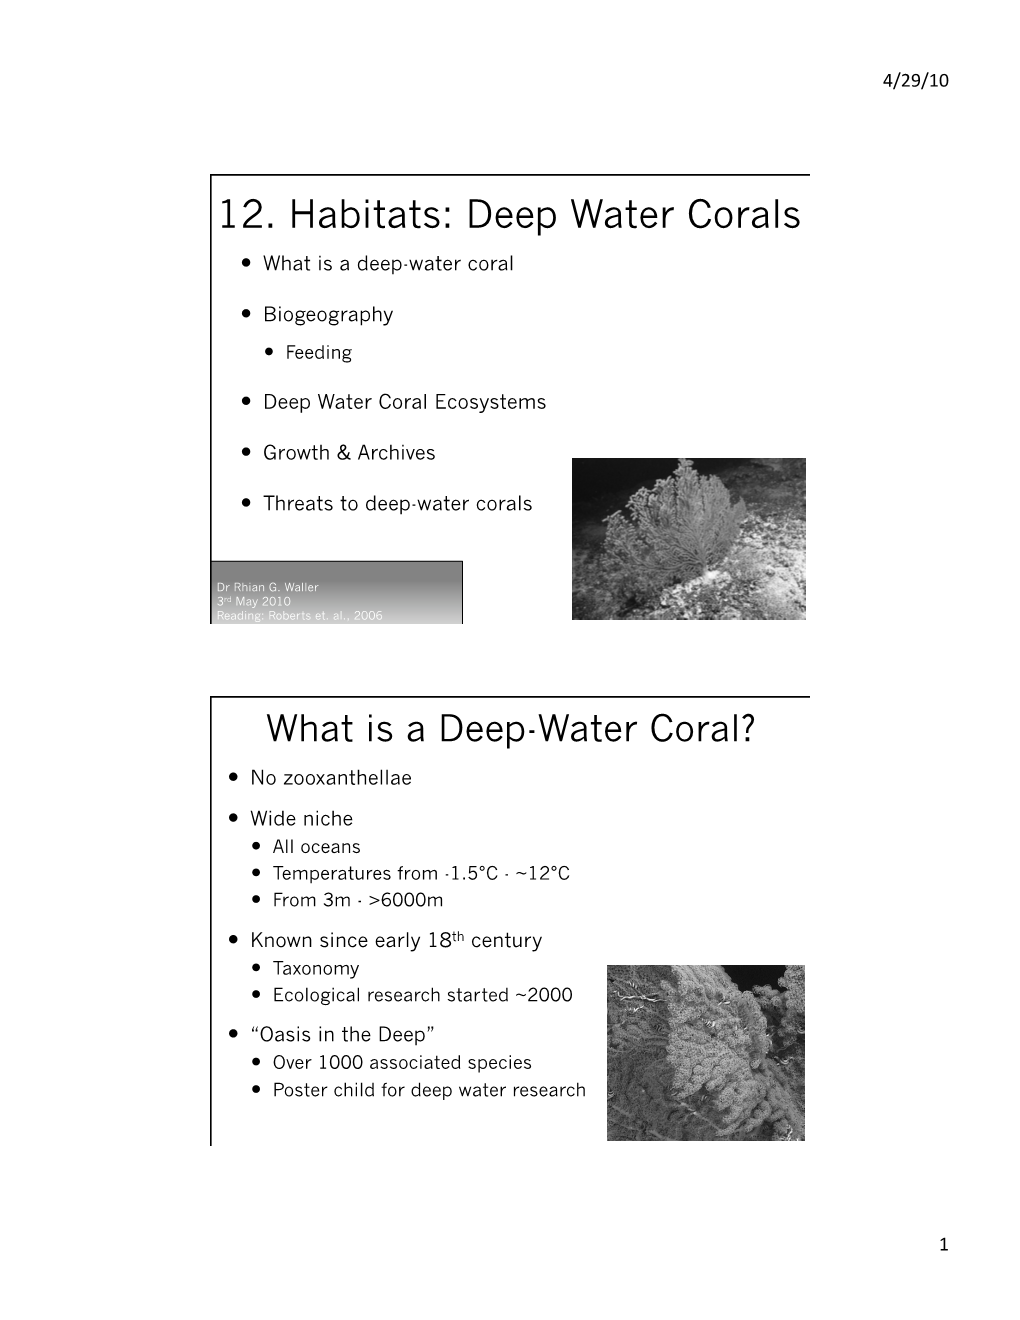 Deep Water Corals  What Is a Deep-Water Coral